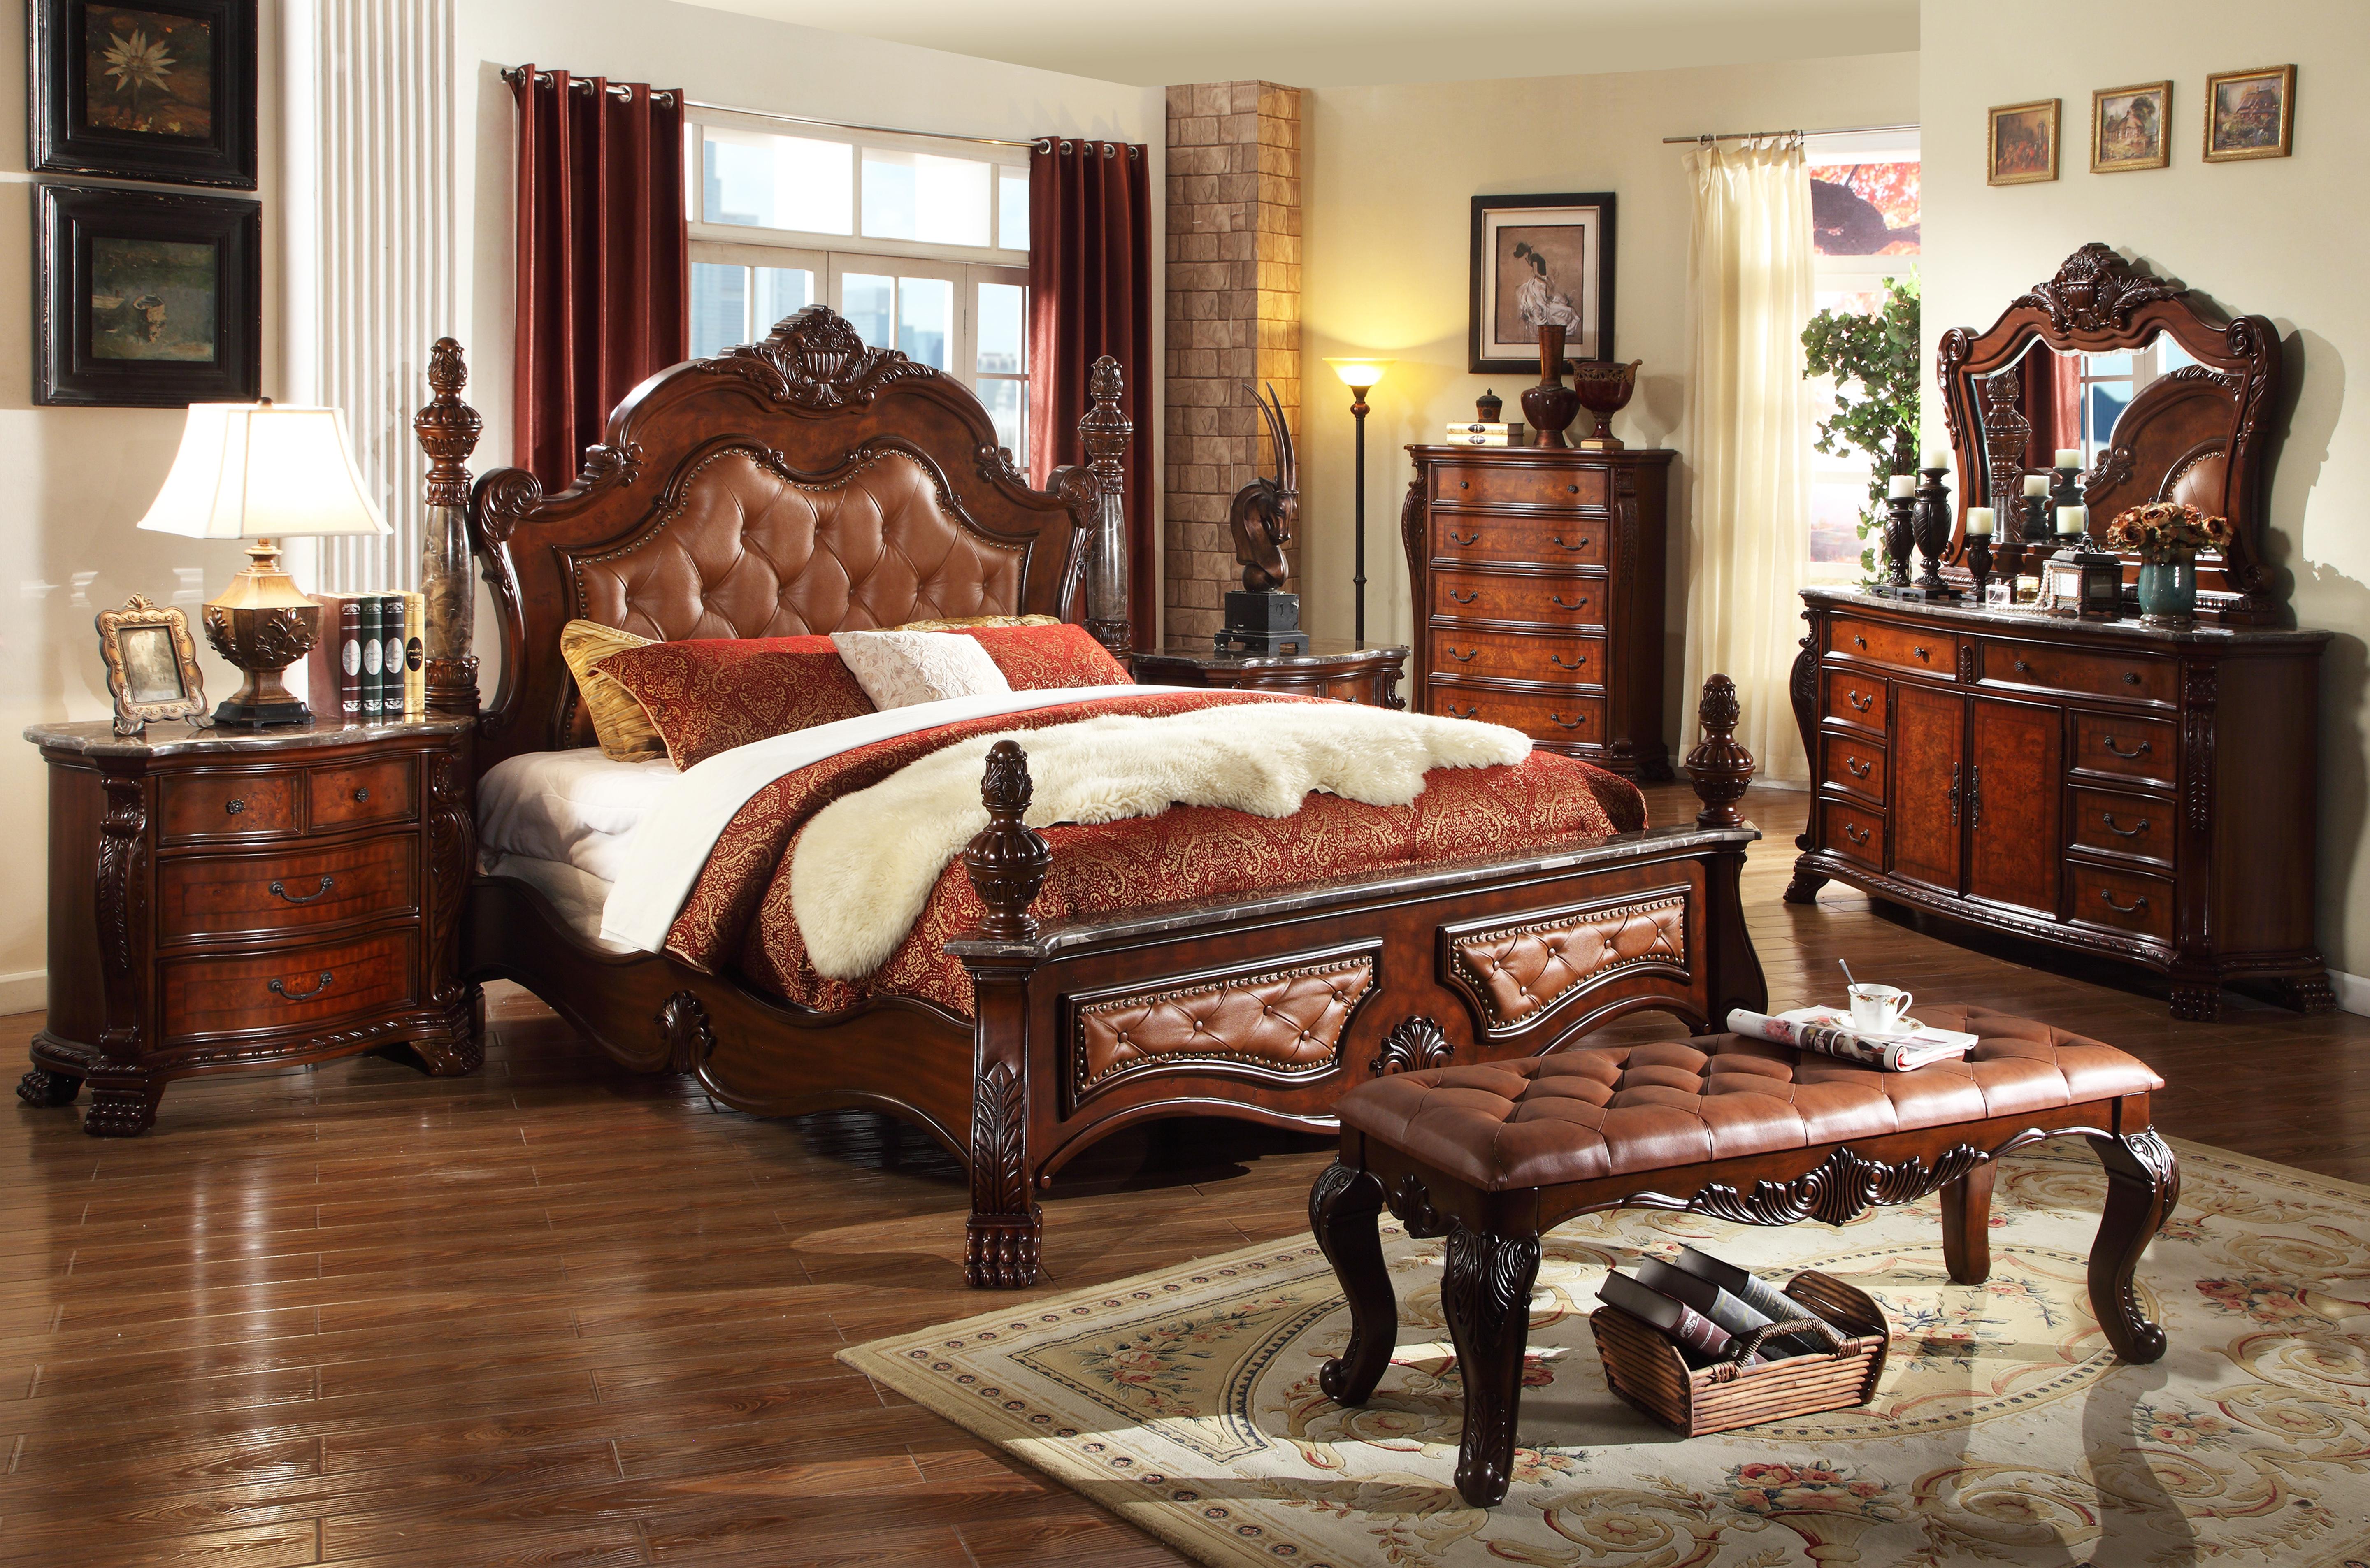 

    
Meridian Luxor King Size Bedroom Set 5pcs in Rich Cherry Hand Carved Traditional
